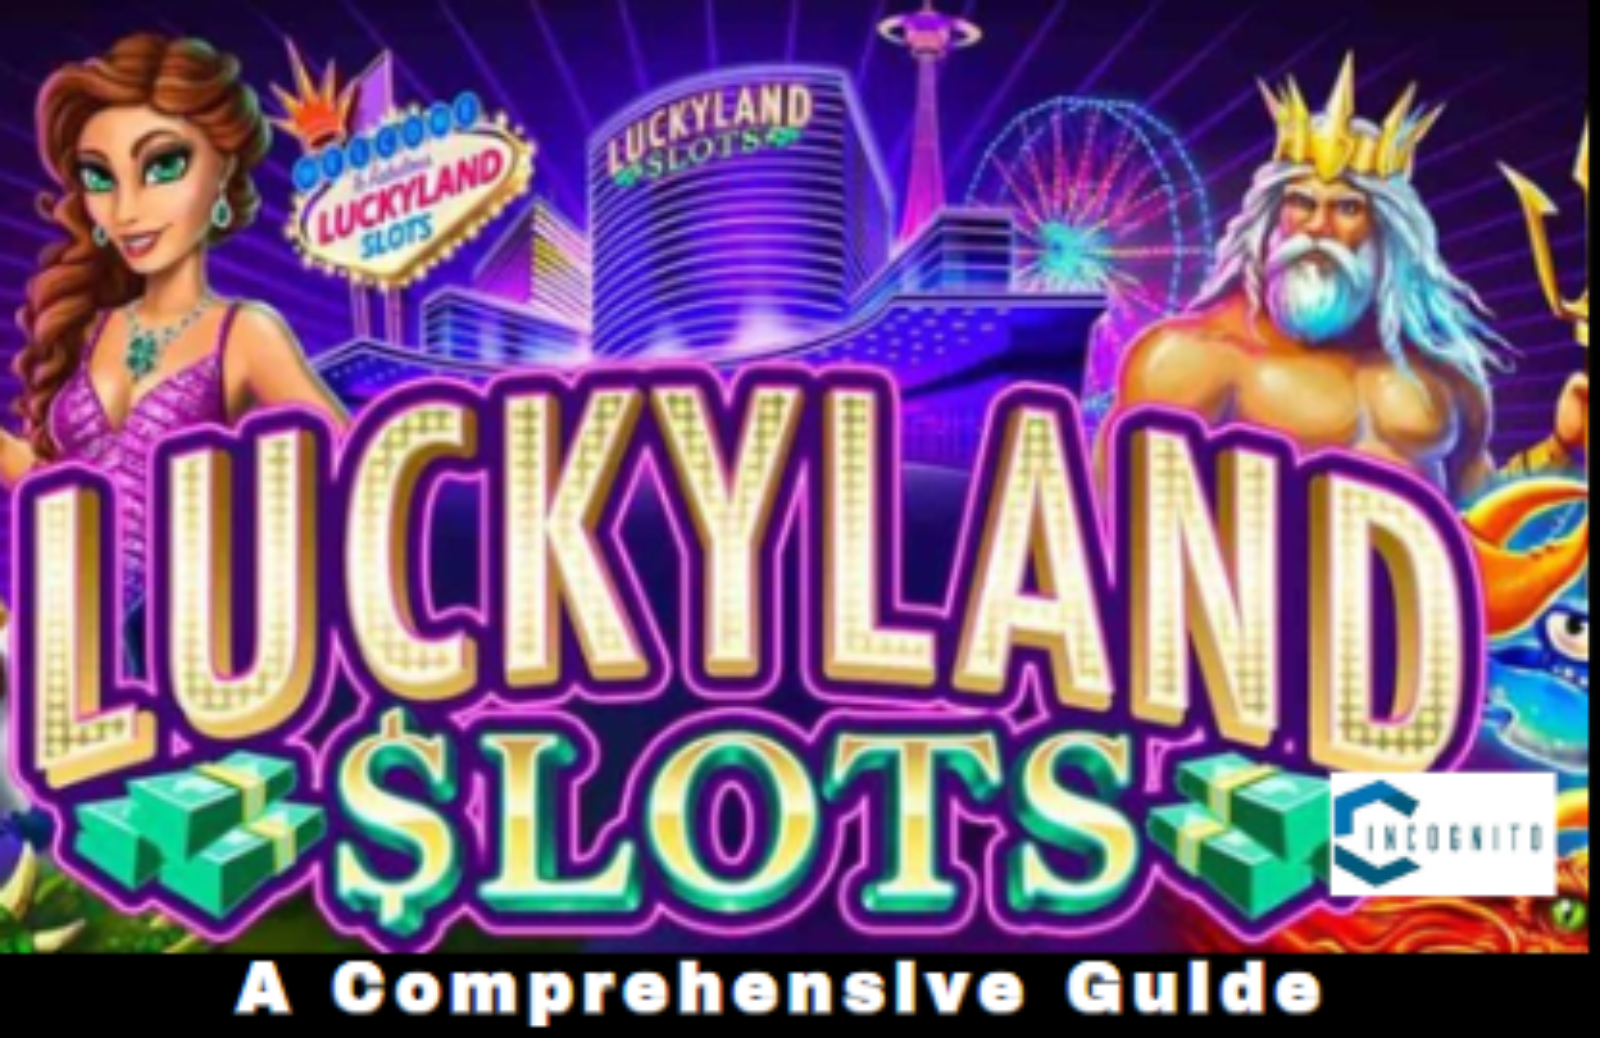 A Comprehensive Guide to LuckyLand Slots App